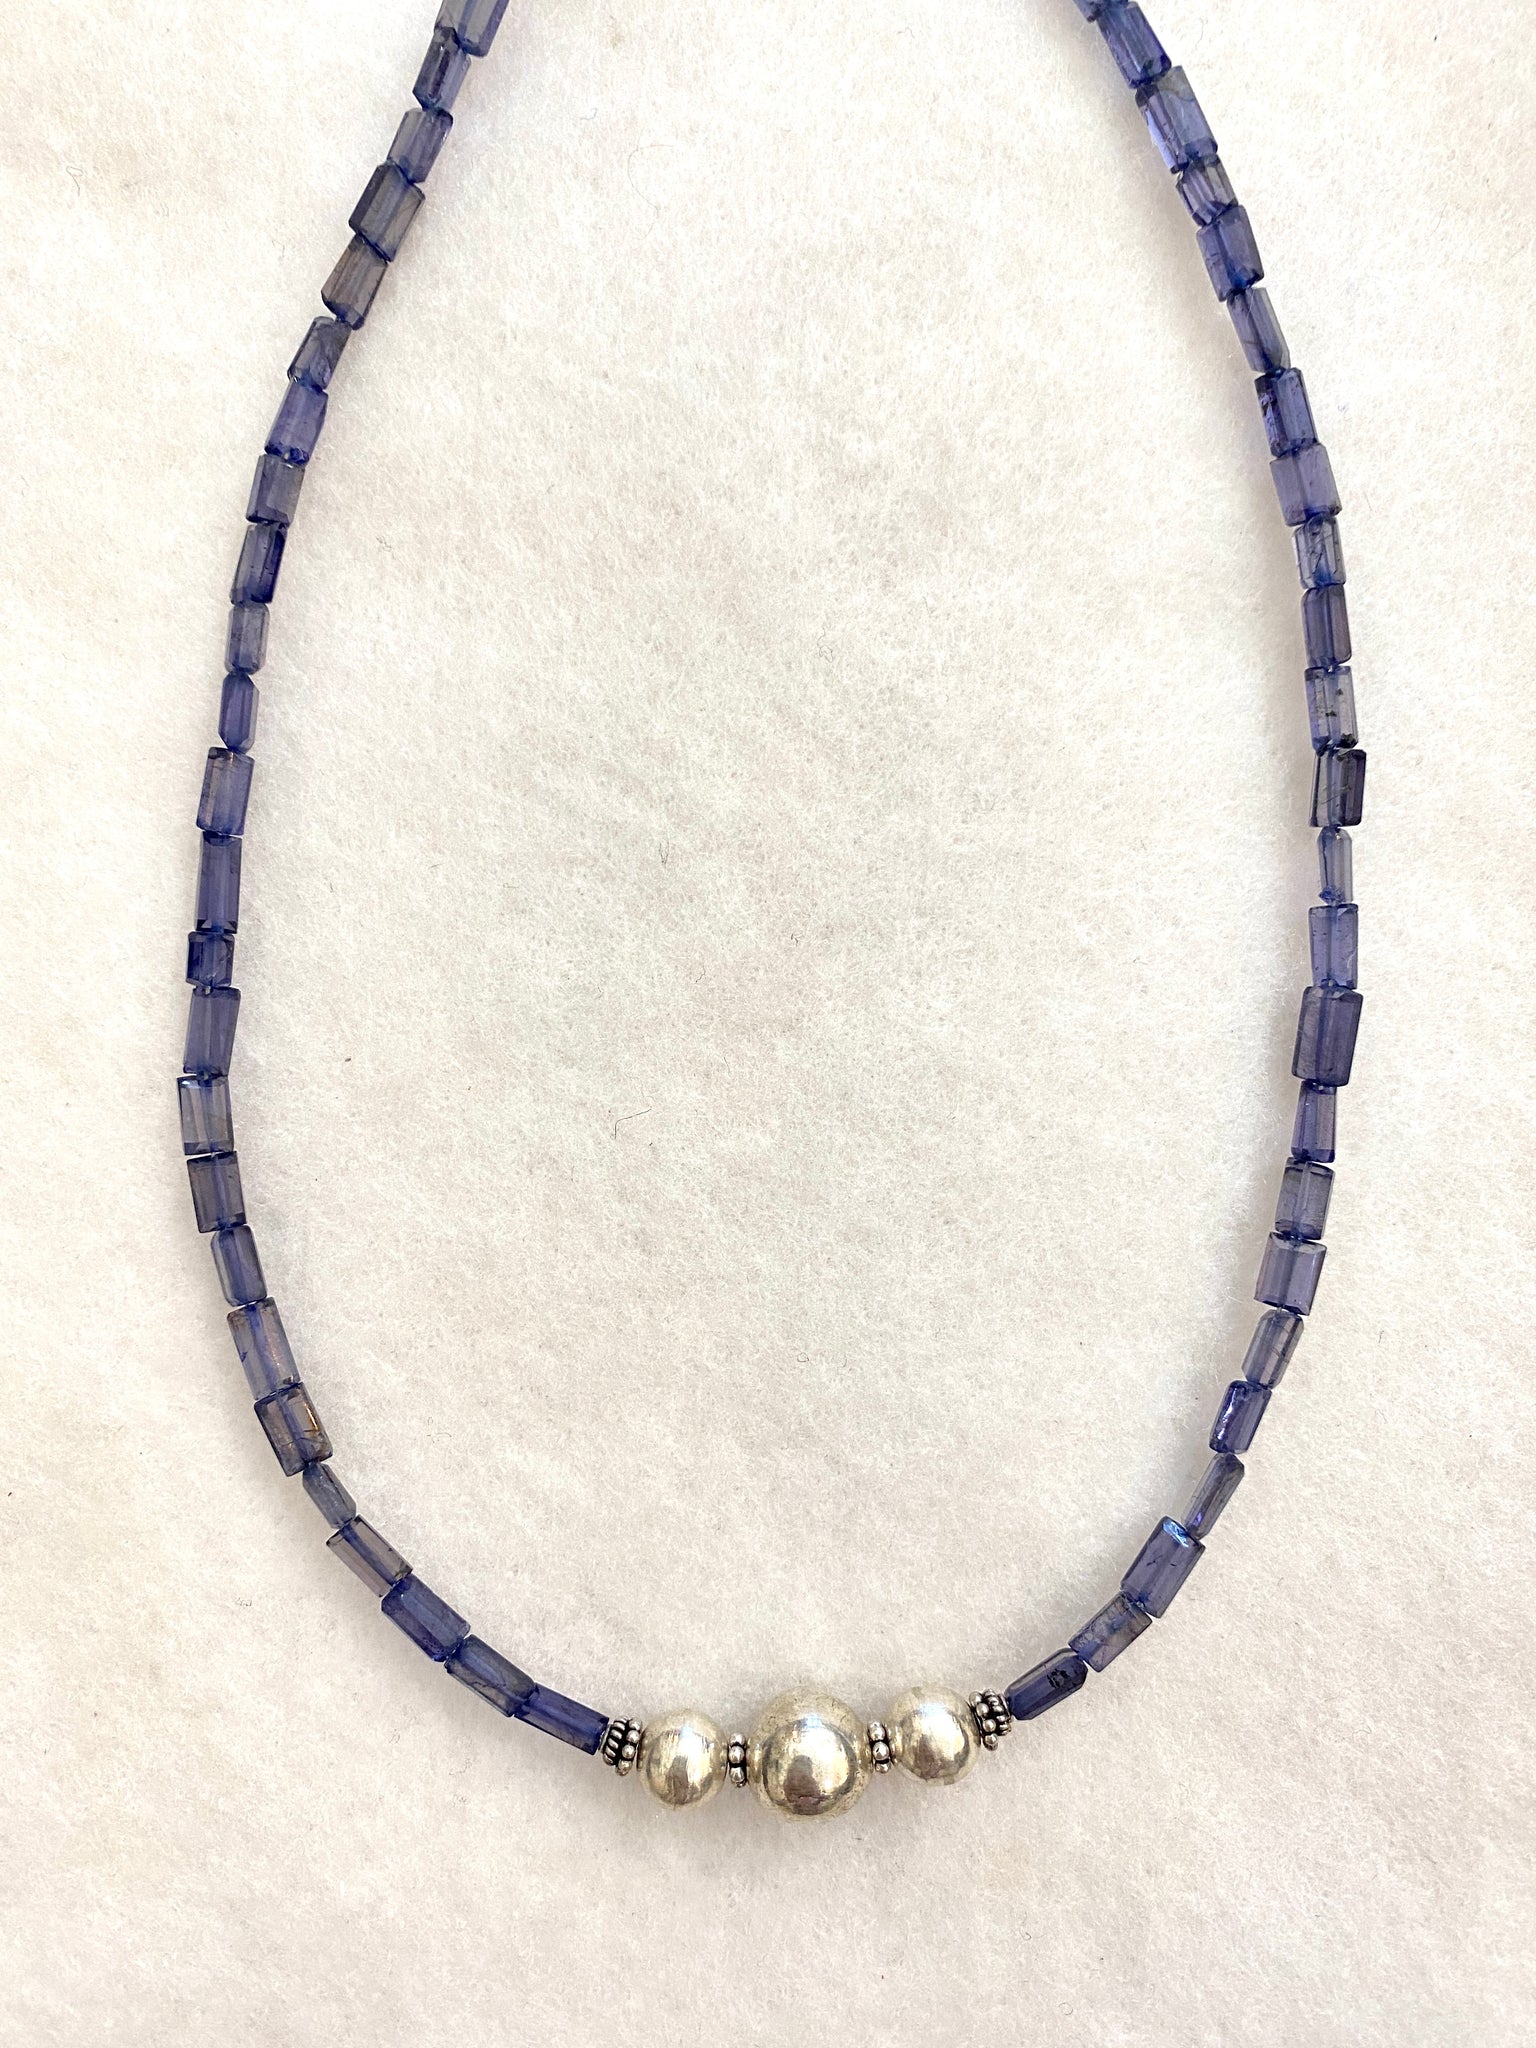 Elegant Iolite Stone with Sterling Silver Beads Accent Necklace